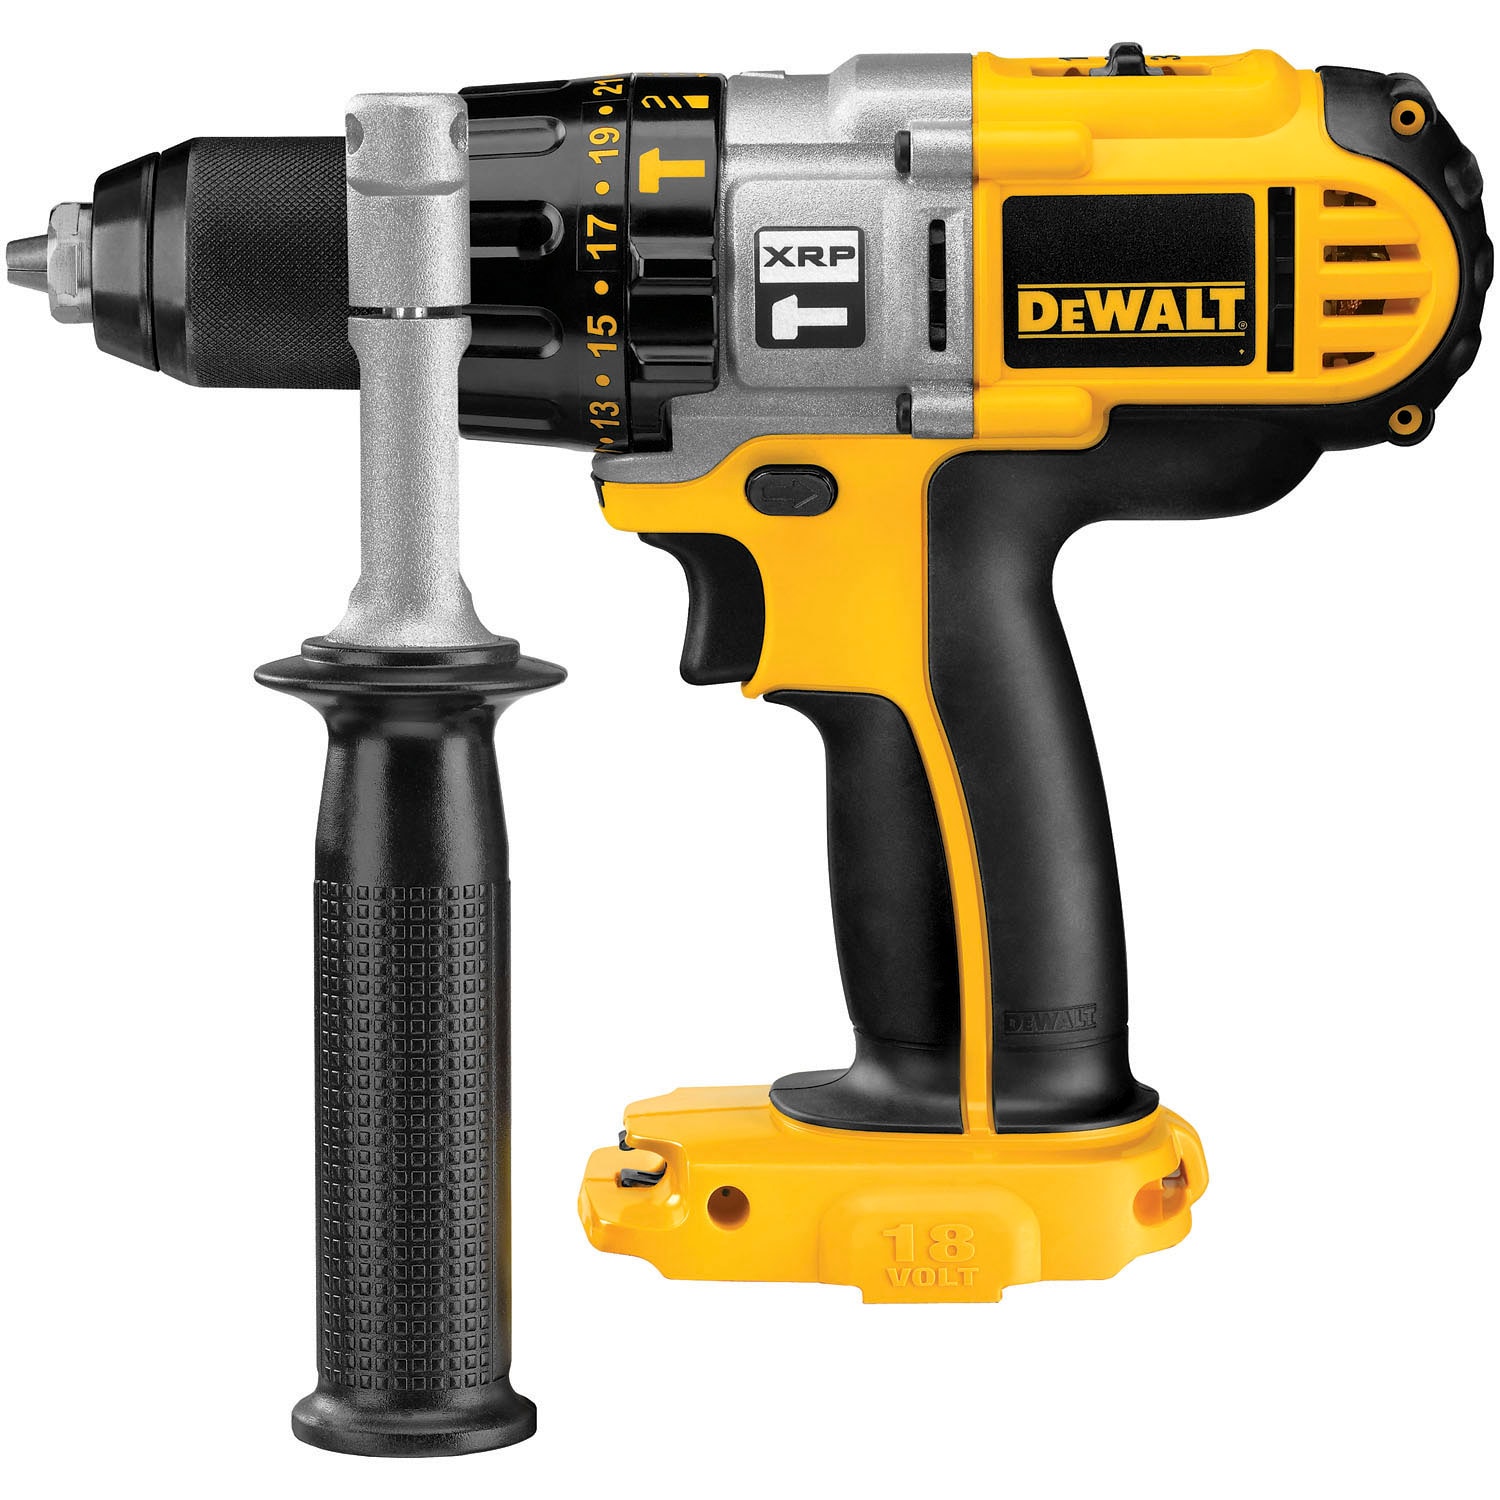 DEWALT XRP 1/2-in 18-volt-Amp Variable Speed Cordless Hammer Drill (Bare  Tool) at